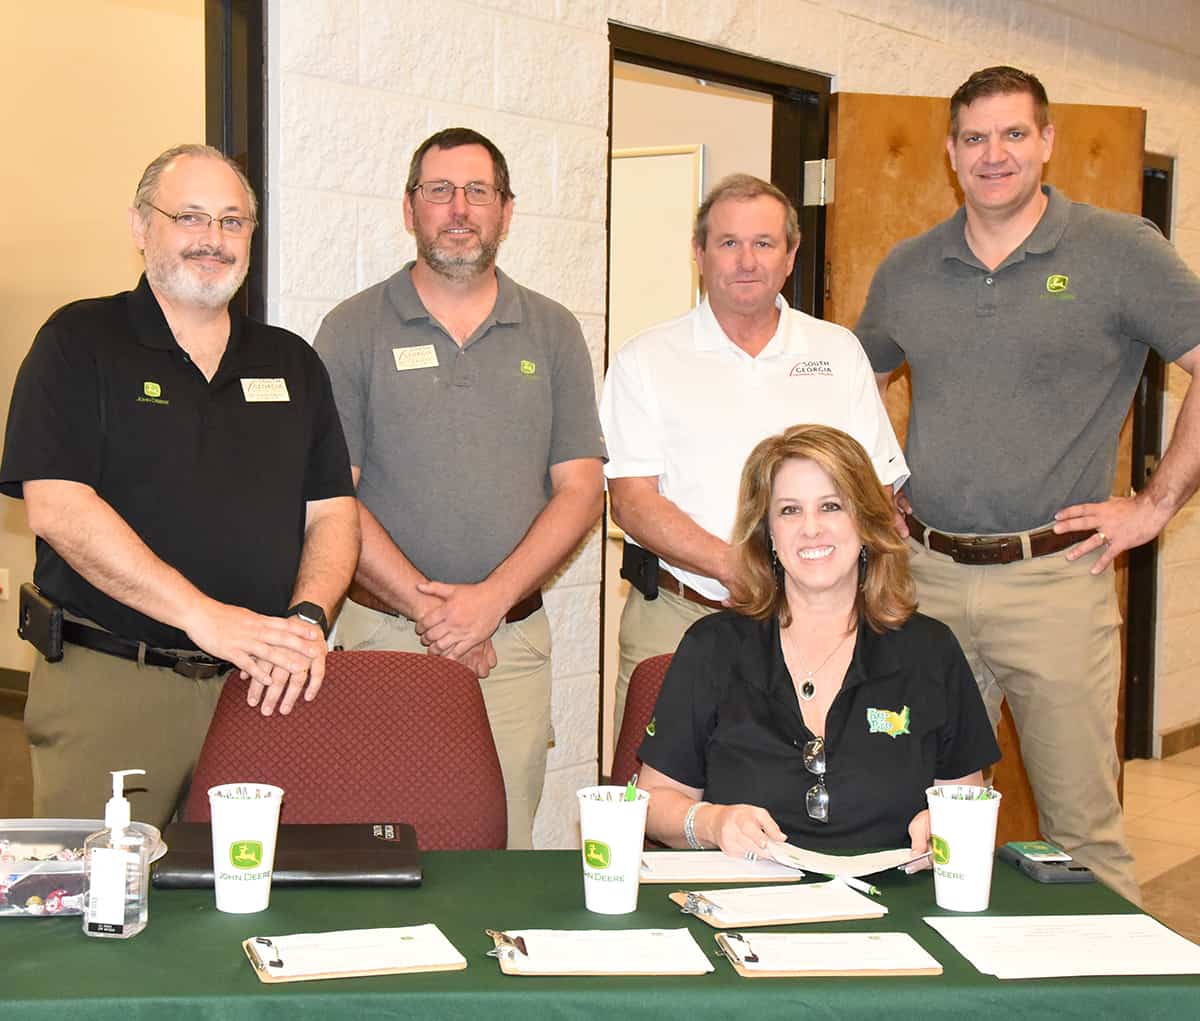 Shown above (l to r) are South Georgia Technical College Dean of Academic Affairs David Finley with John Deere Tech instructors Matthew Burks and Wayne Peck along with John Deere Territory Customer Support Manager South East Mississippi, South Alabma, and West Georgia for Flint Ag, Sun South, and Smith Tractor Dave Bostic and John Deere Corporate Recruitment Manager for Ag Pro Kim Walden.